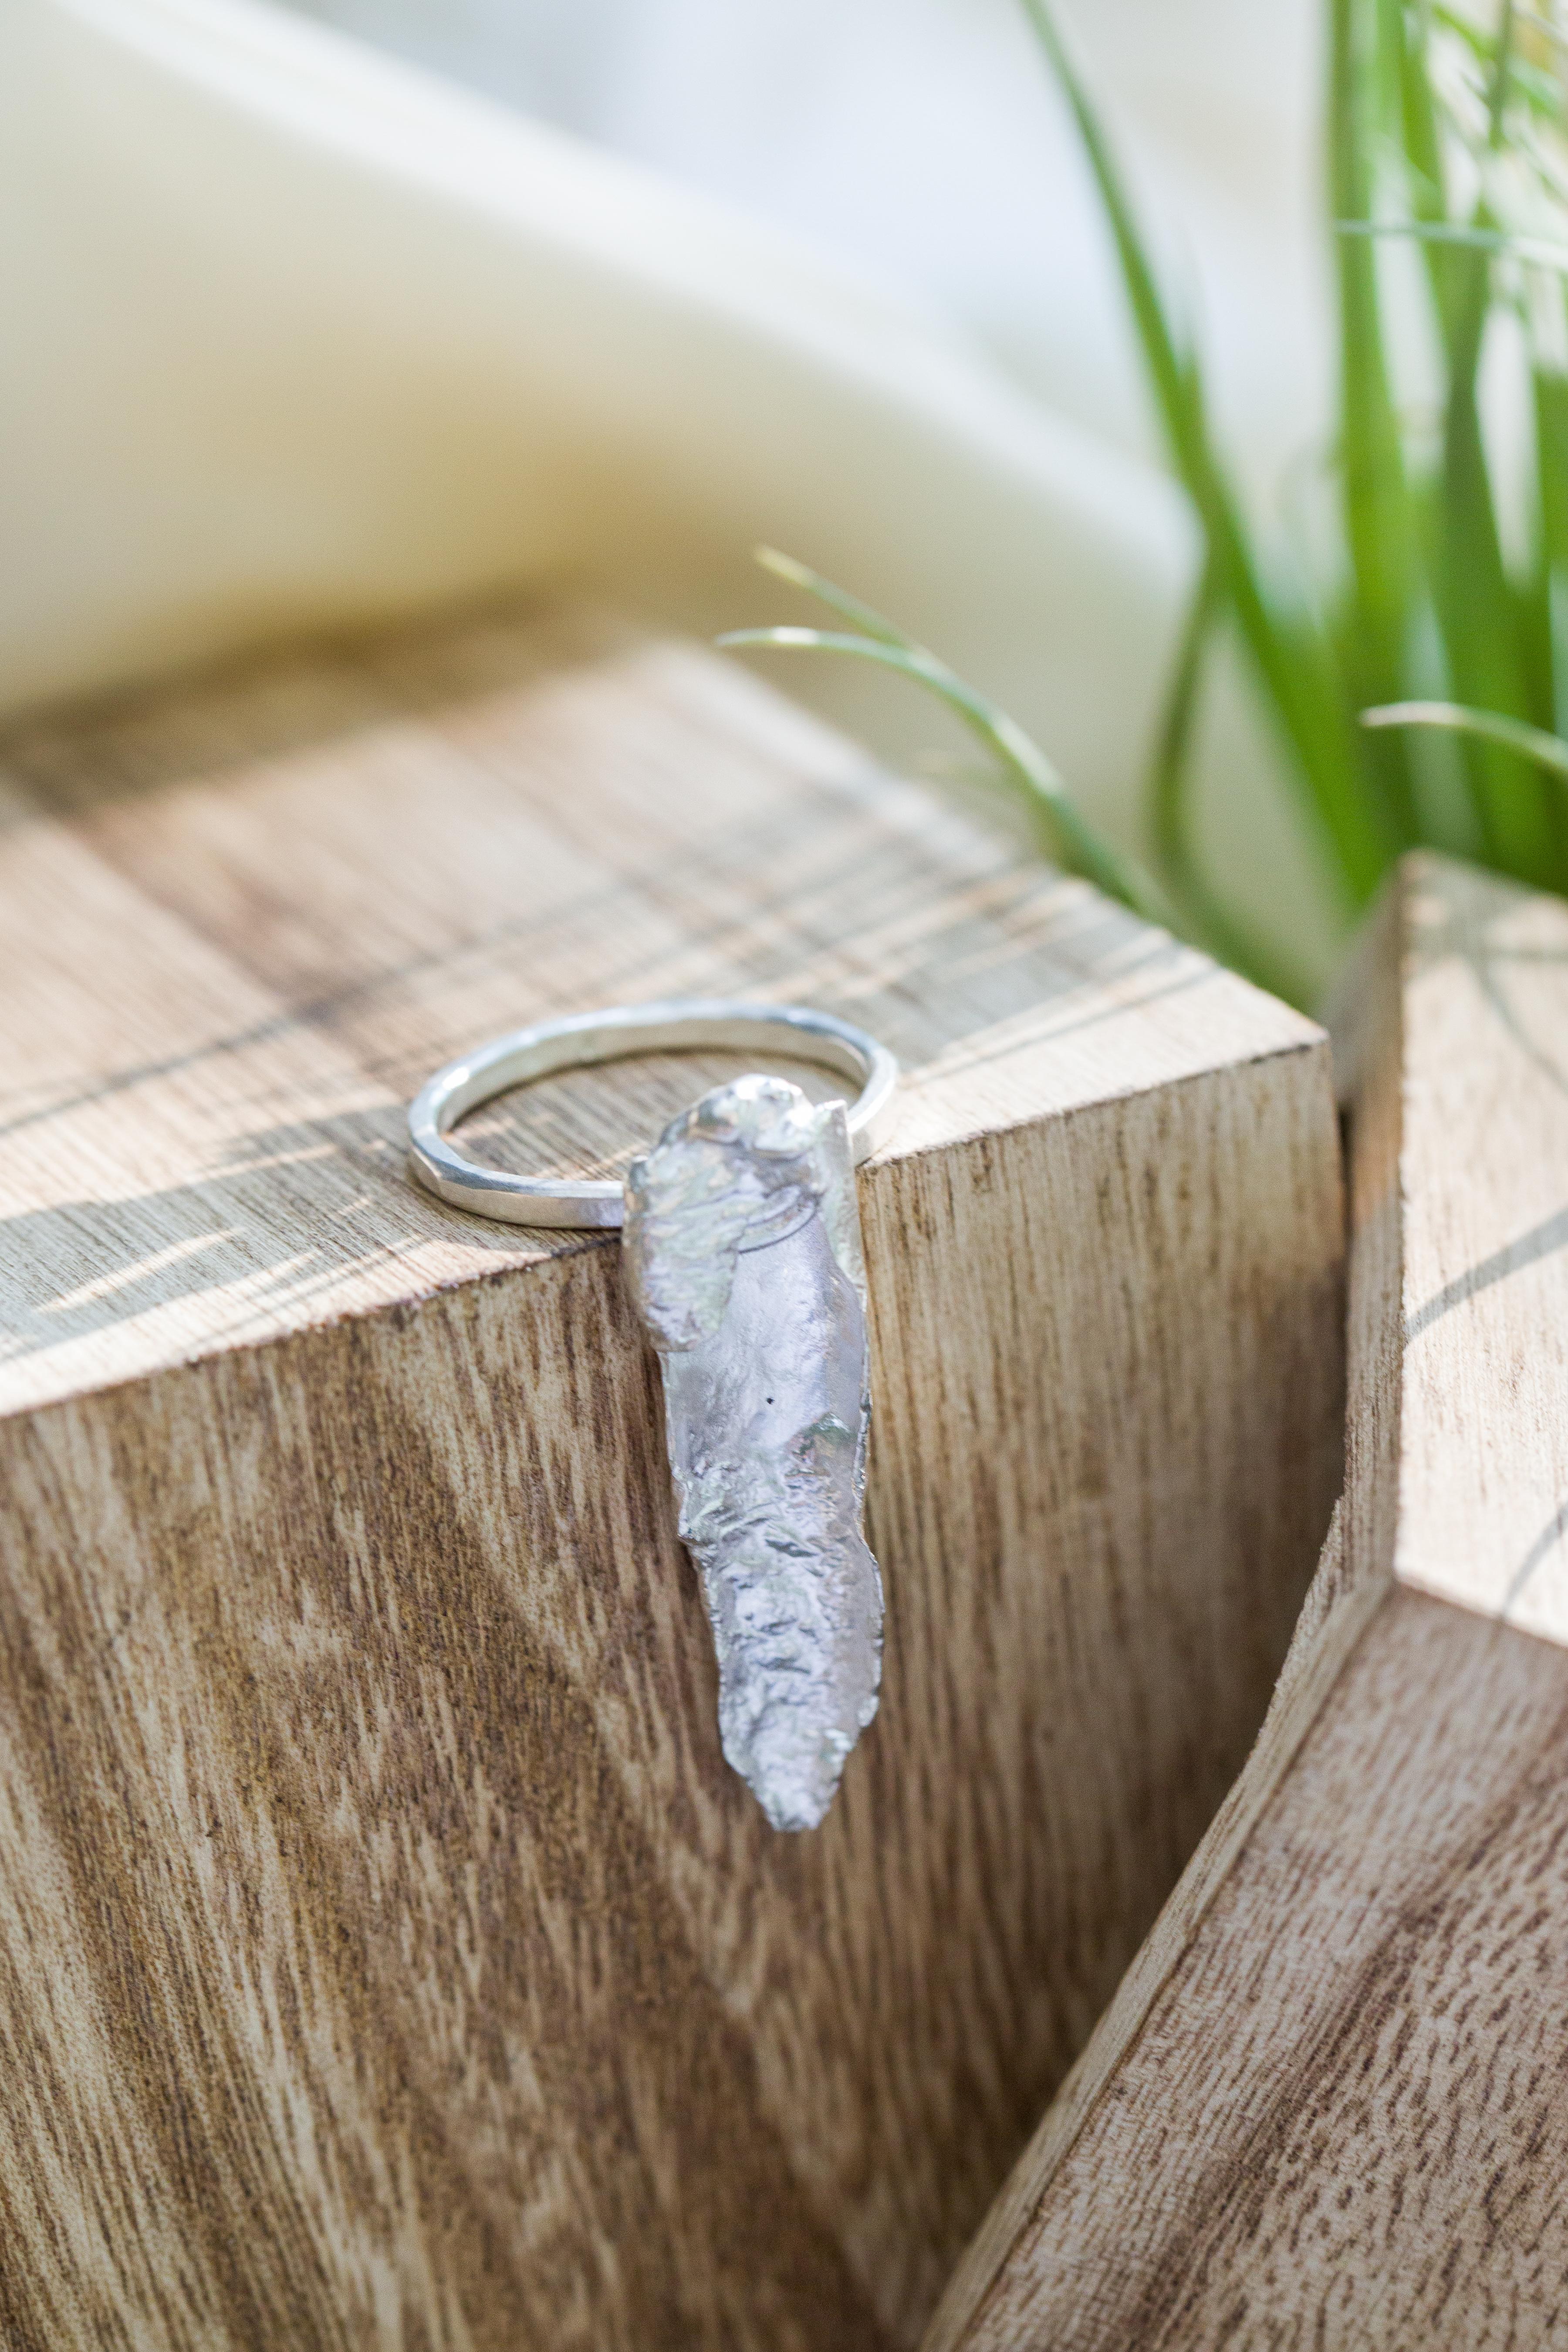 A jewel for protection, inward and outward. Reminiscent of stalactites found in caves, formed slowly, not to be carelessly touched.

Sterling silver ring intended to be worn up or down. Defiant and elegant with glistening texture. Each ring band had